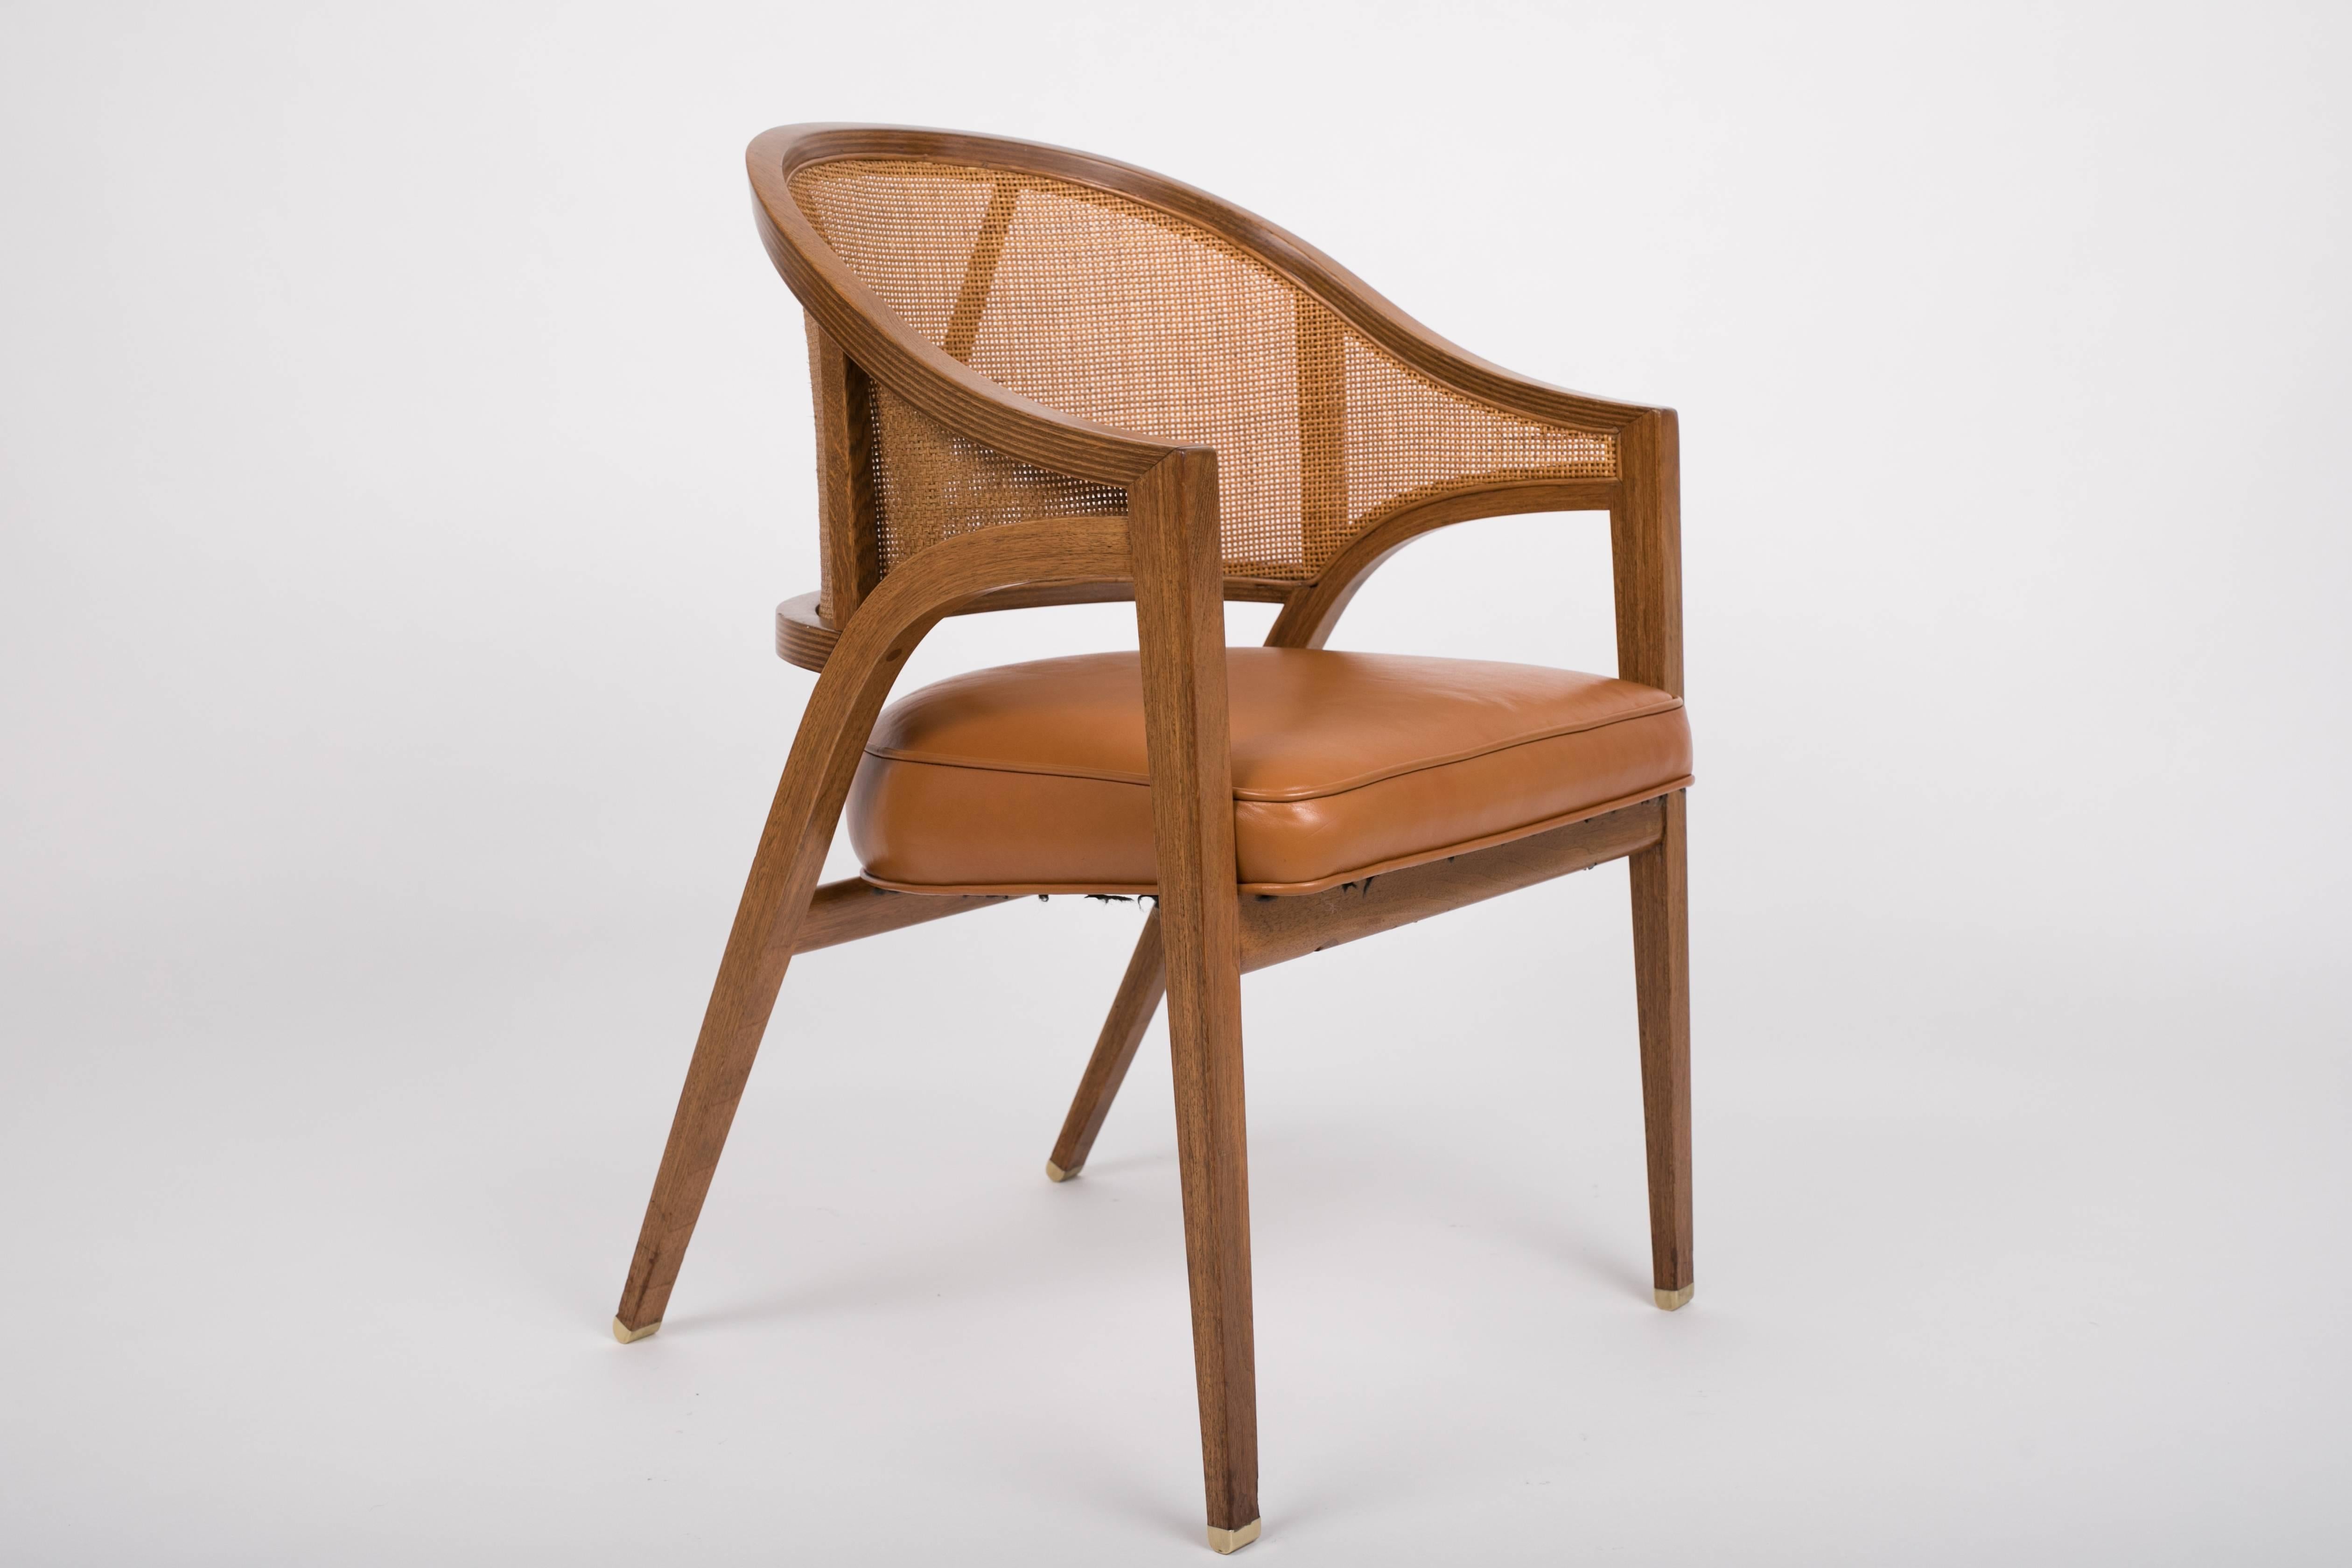 An elegant captain chair from designed by Edward Wormley and produced by Dunbar in the 1950s. It is a walnut armchair with a shell-like, curved backrest of basket-woven cane with an upholstered seat. The rails of the backrest are laminated walnut